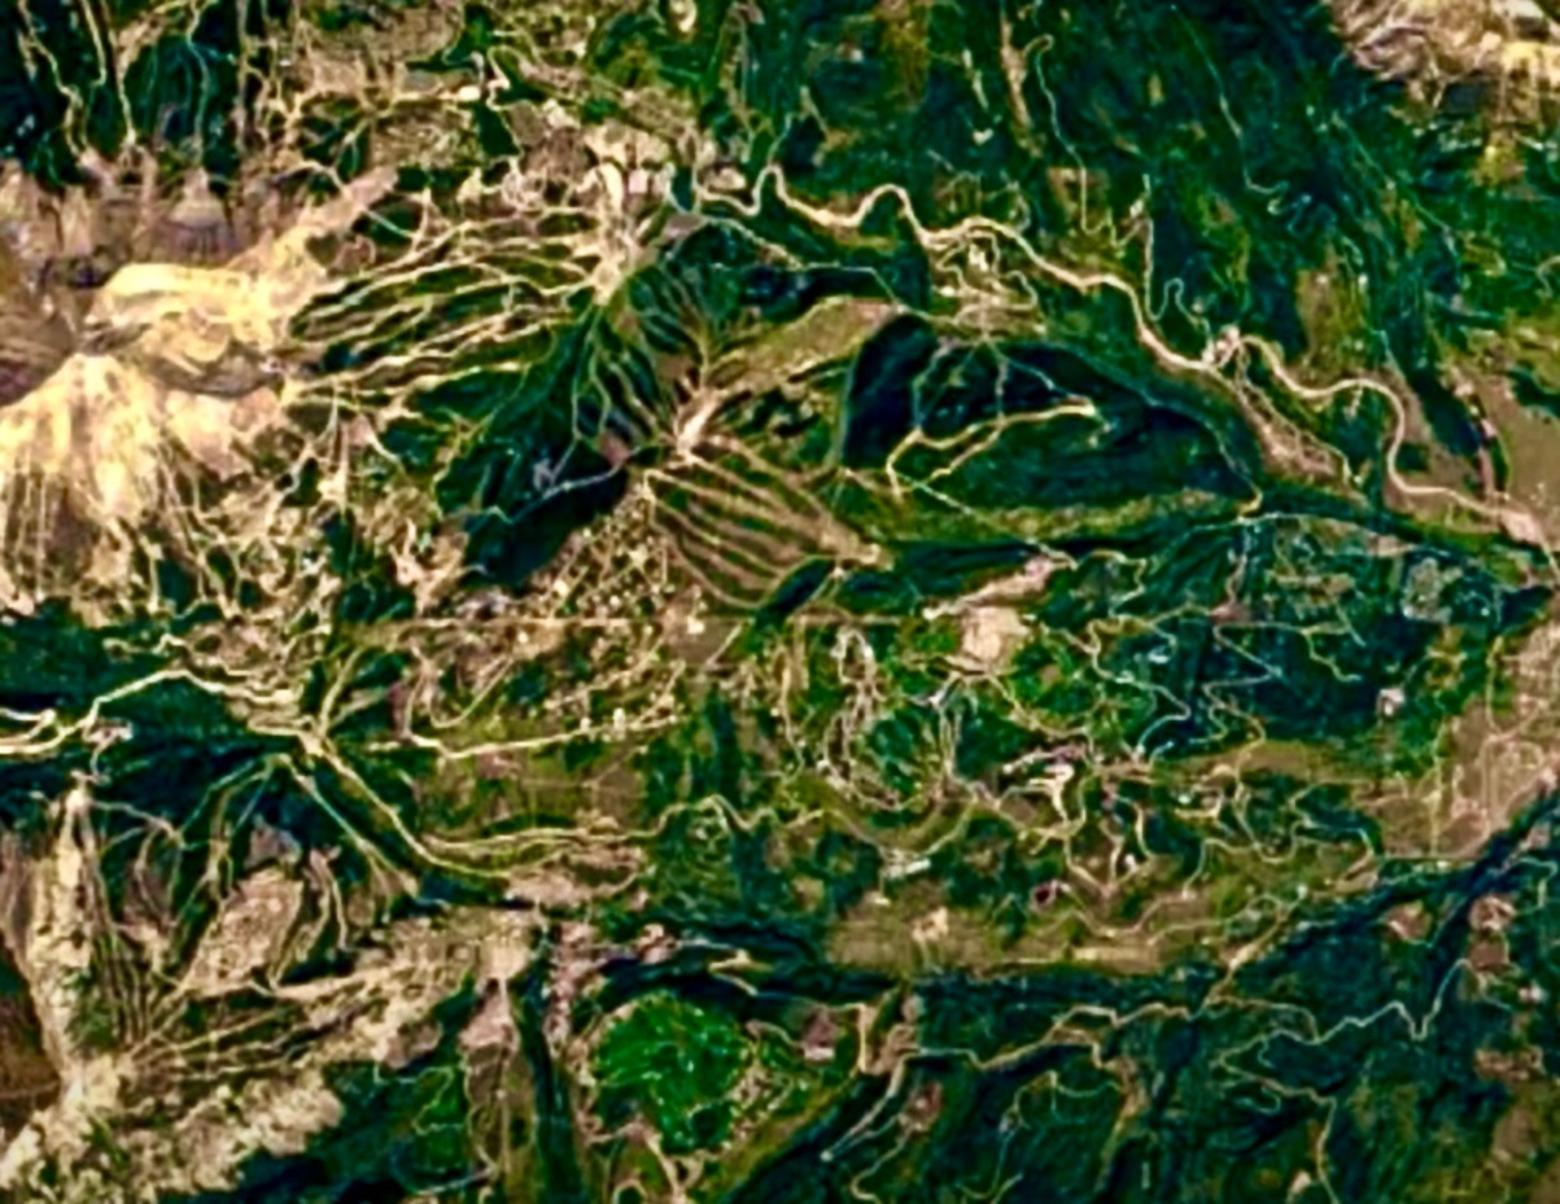 The human footprint of Big Sky, Montana as captured by GoogleEarth and satellite imagery between 1984 and 2020. Notably, the images do not include covid-related growth that generated more than $1 billion in real estate changing hands. Big Sky is located right in the middle of the otherwise wild and rugged Madison Mountain Range and its negative spillover affects are impacting the Gallatin River, the wildlife-rich Gallatin Mountains and potentially the Madison Valley which in winter is home of one of the largest migratory elk herds in the West. 